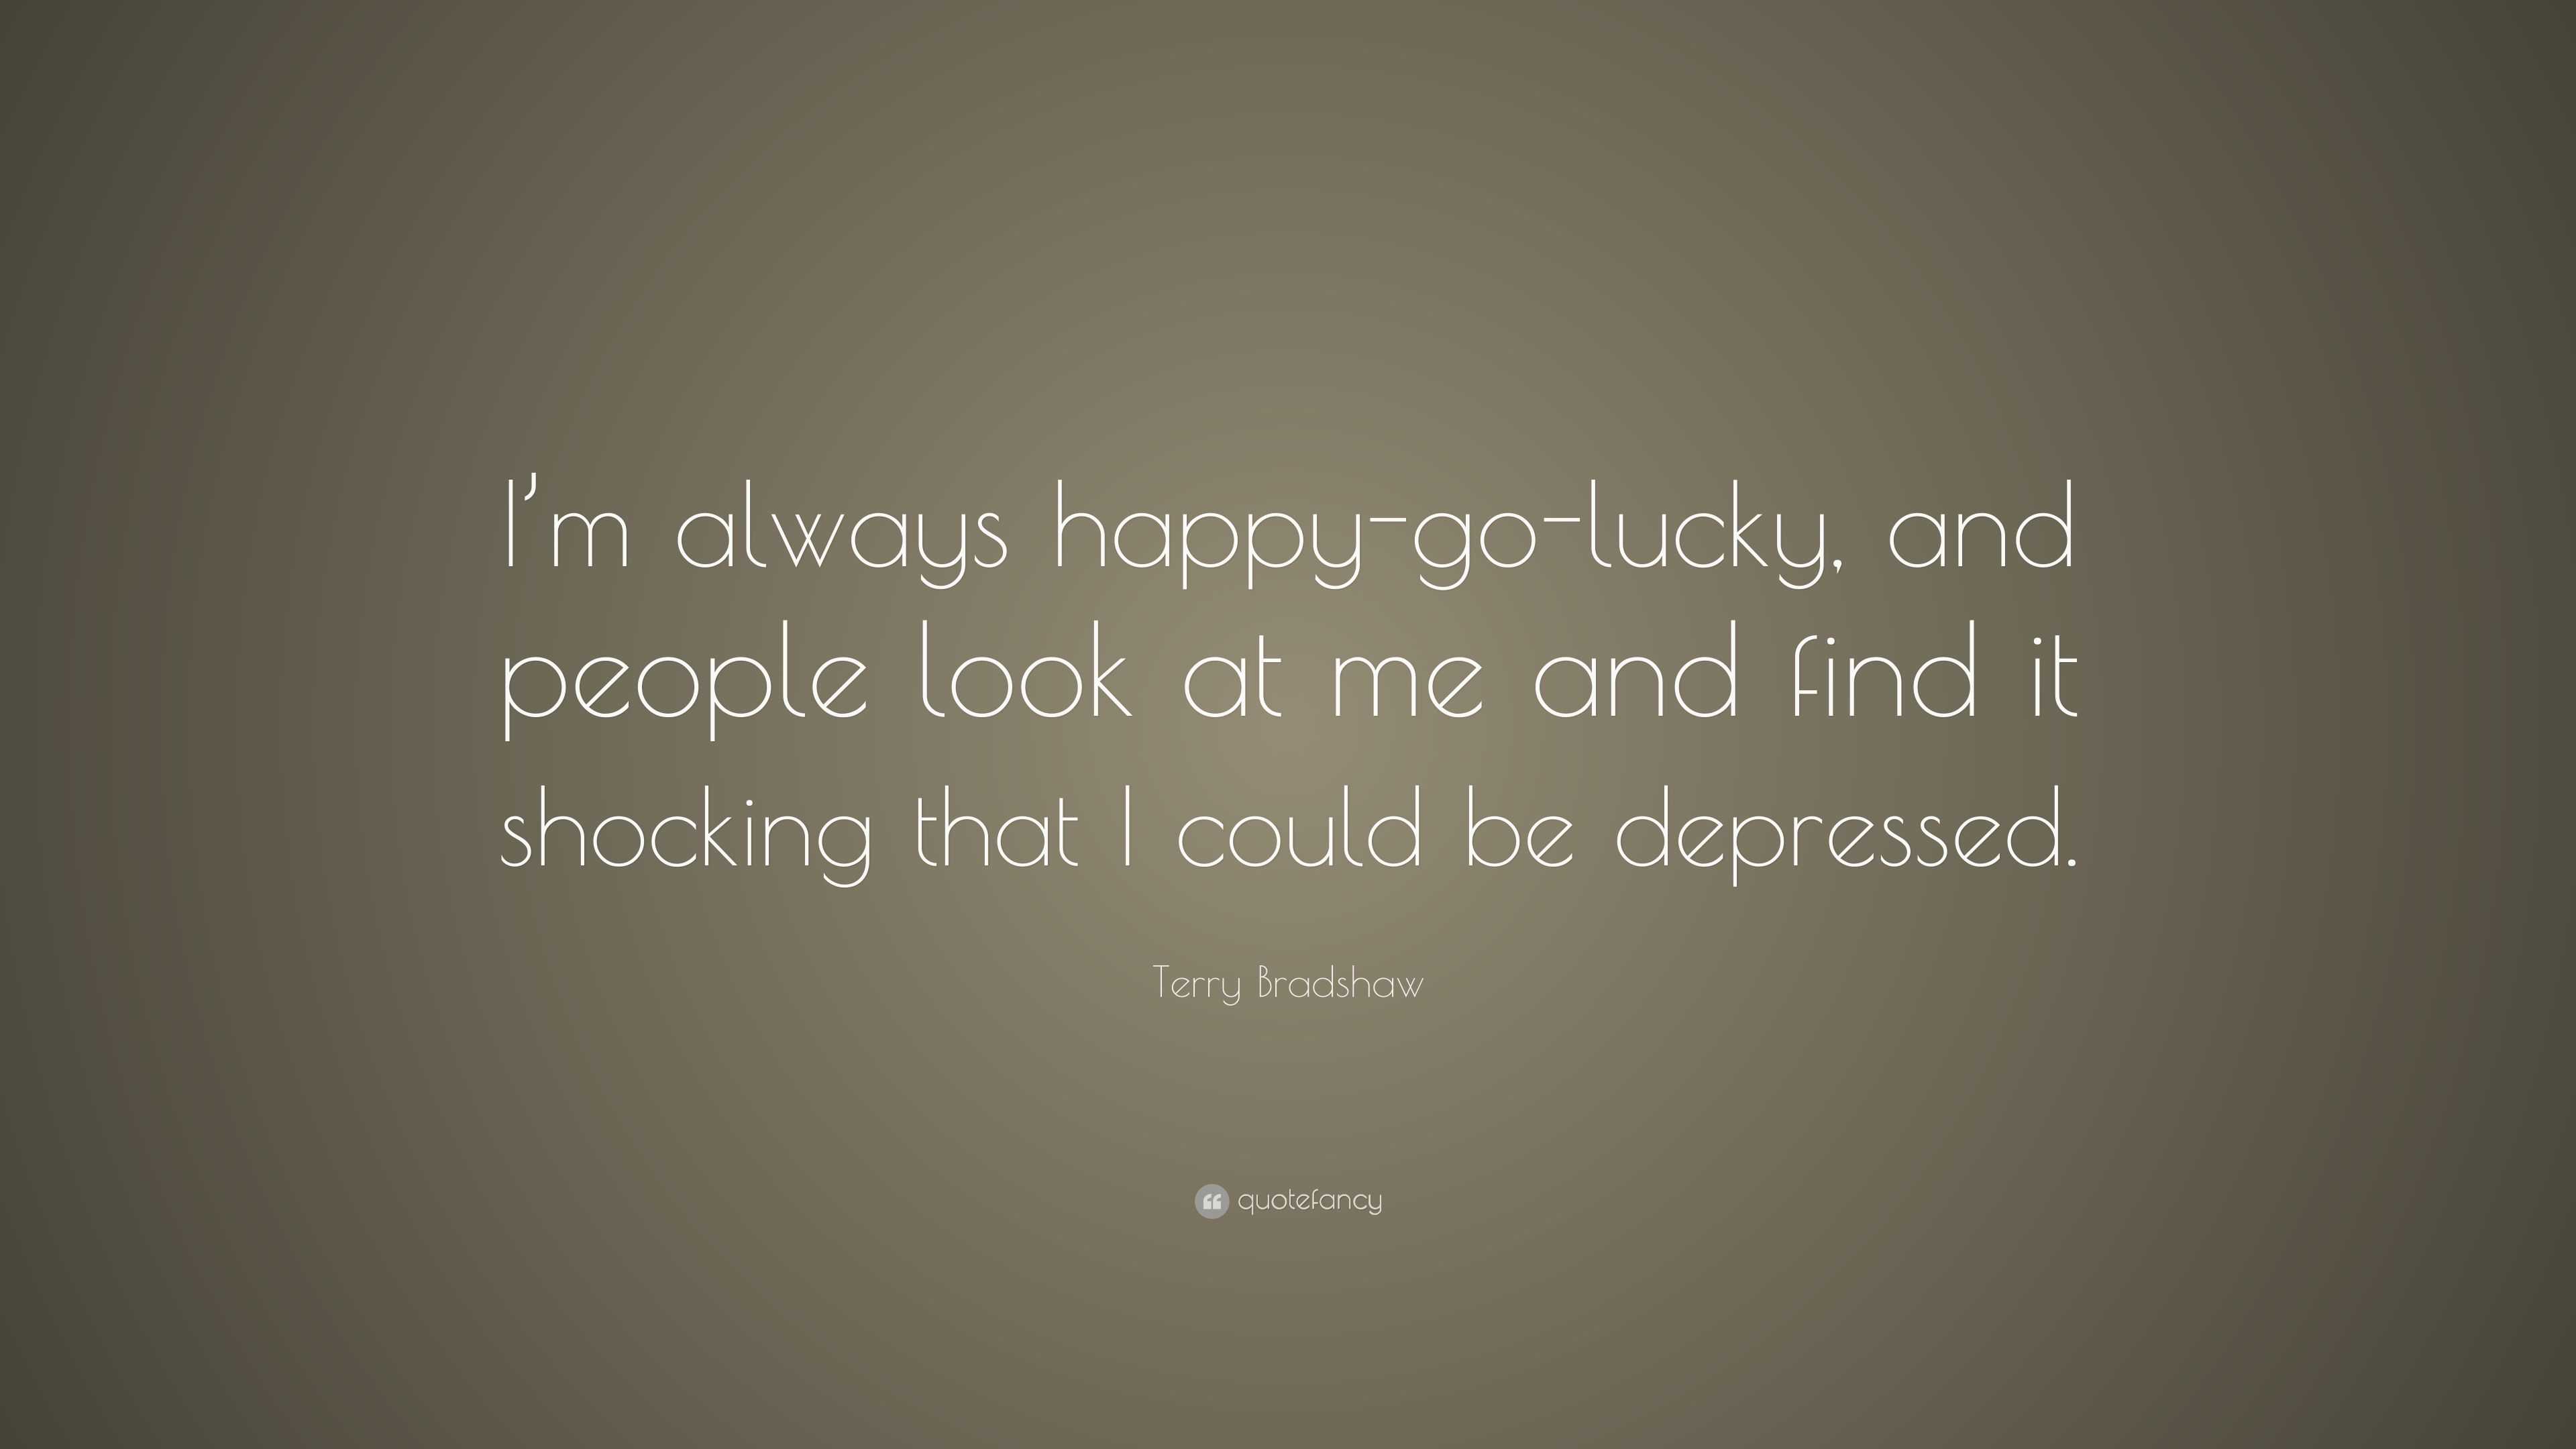 Terry Bradshaw Quote: “I’m always happy-go-lucky, and people look at me